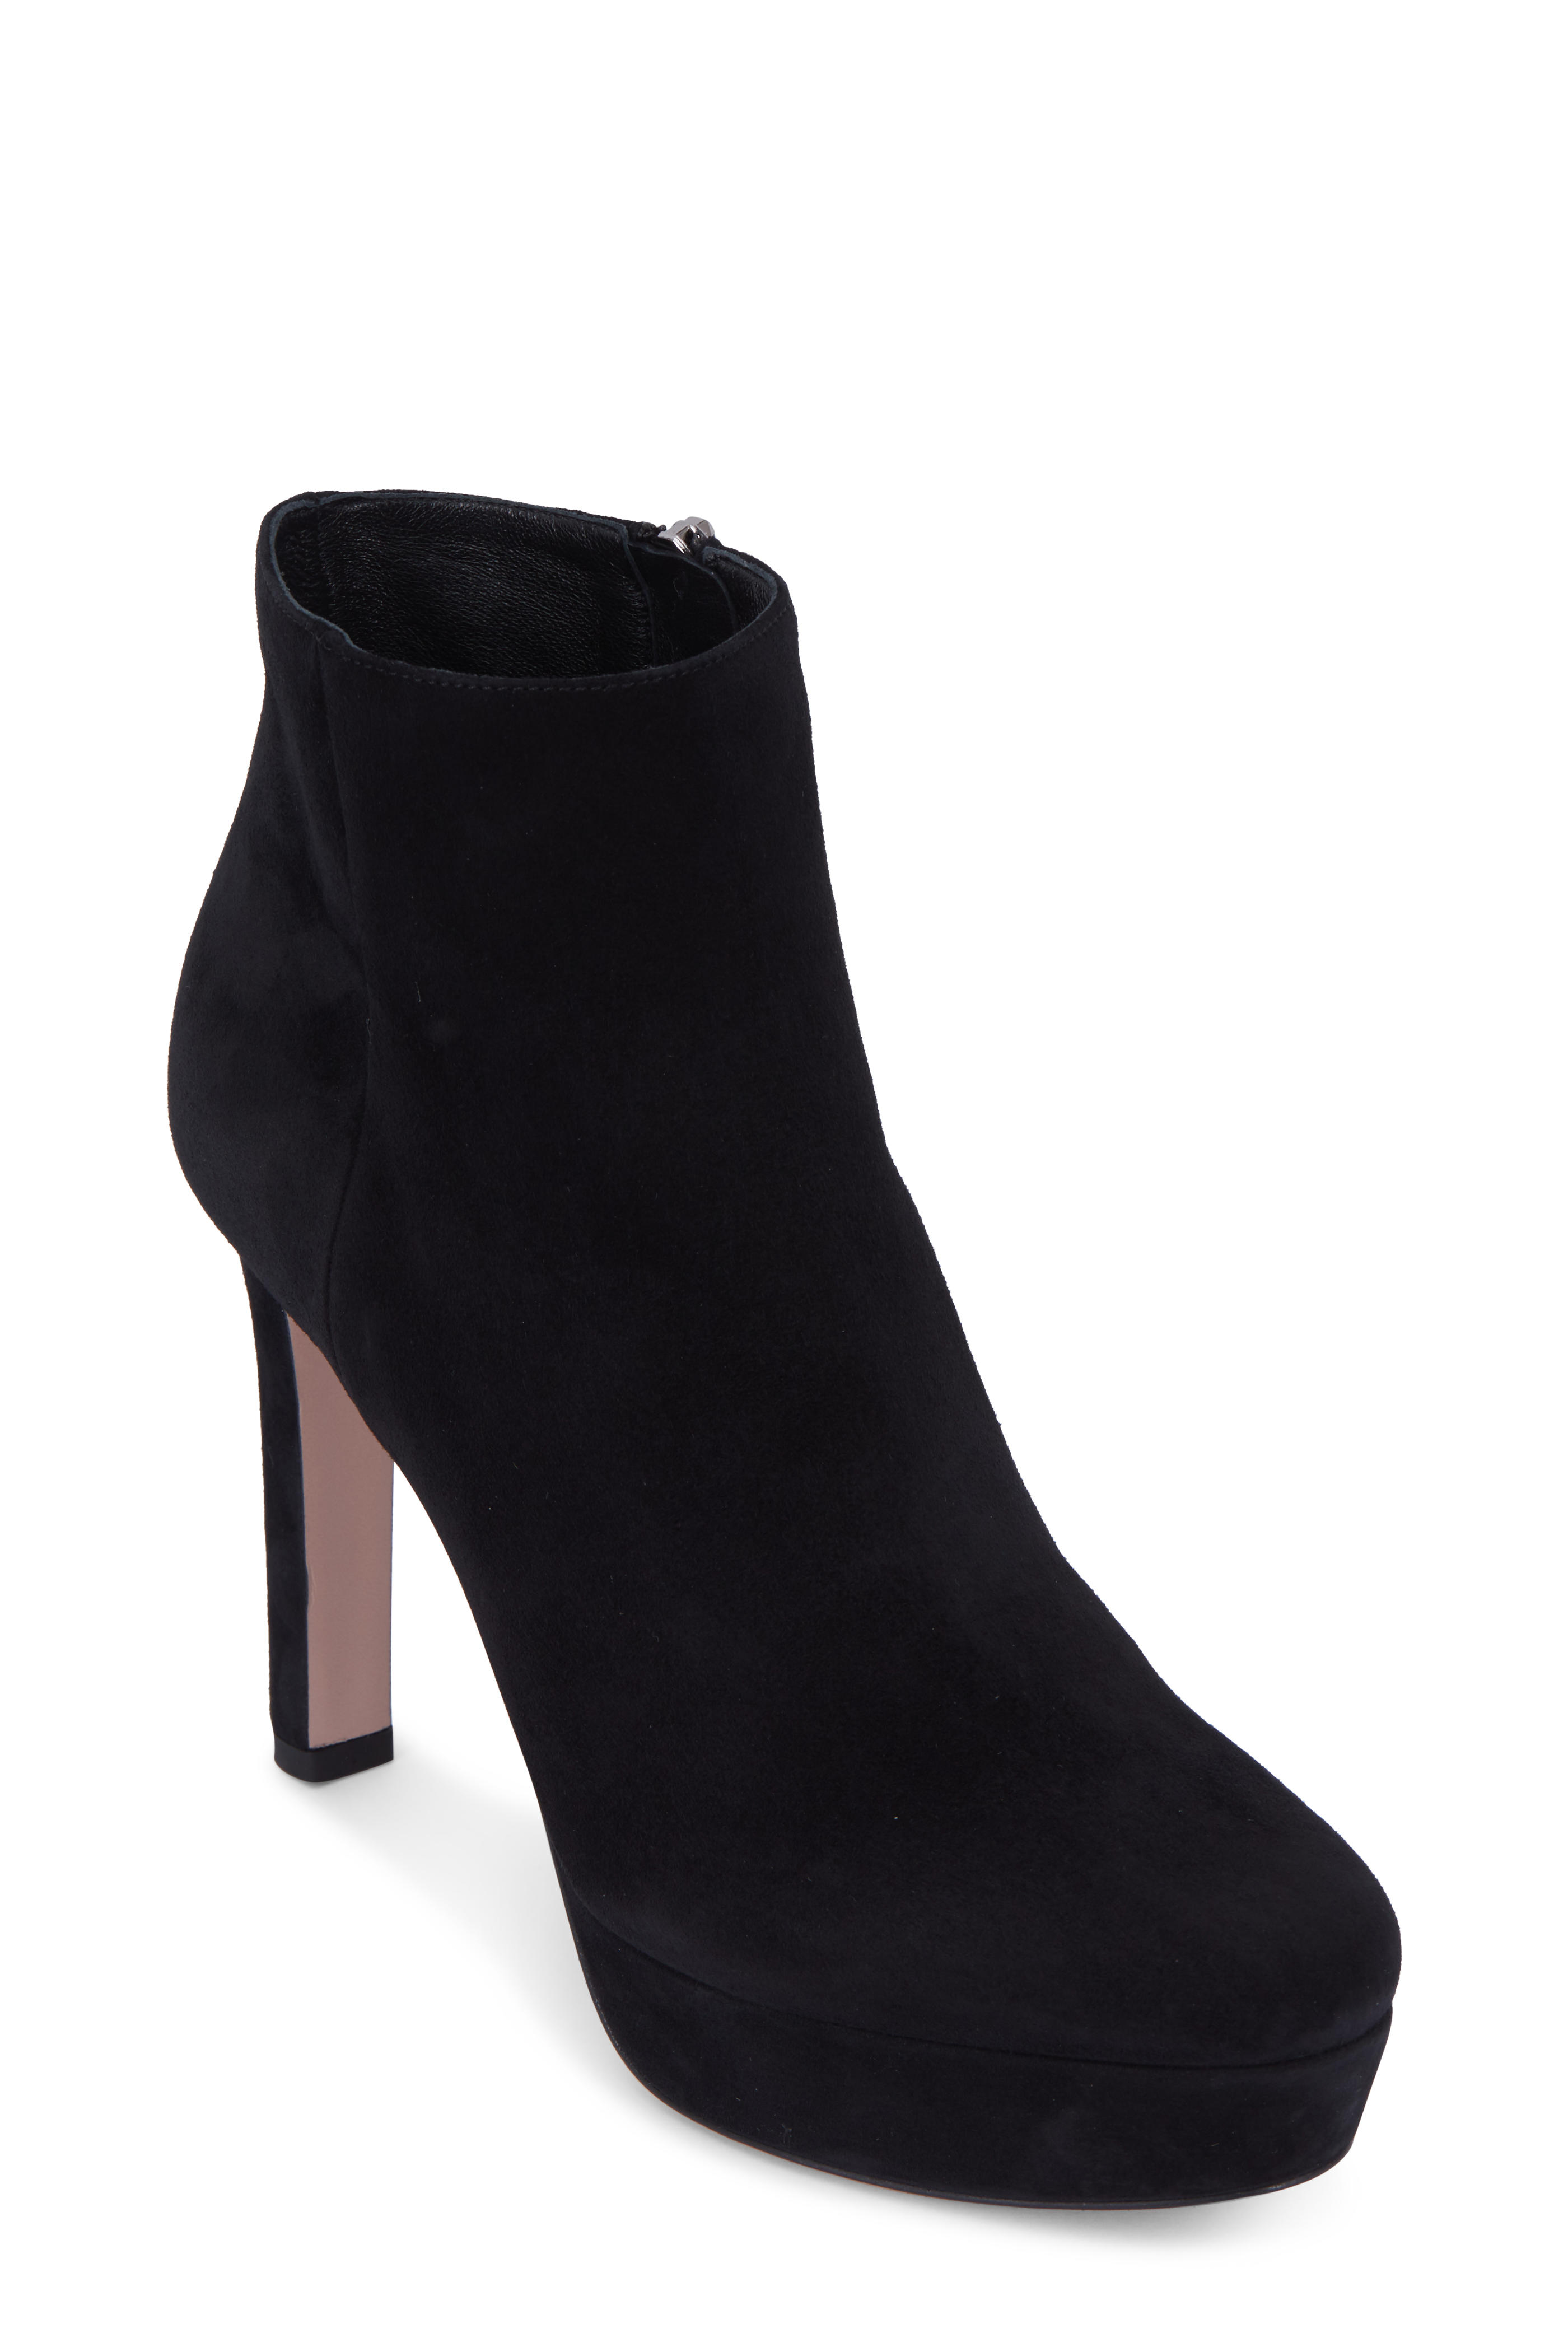 prada suede ankle boots